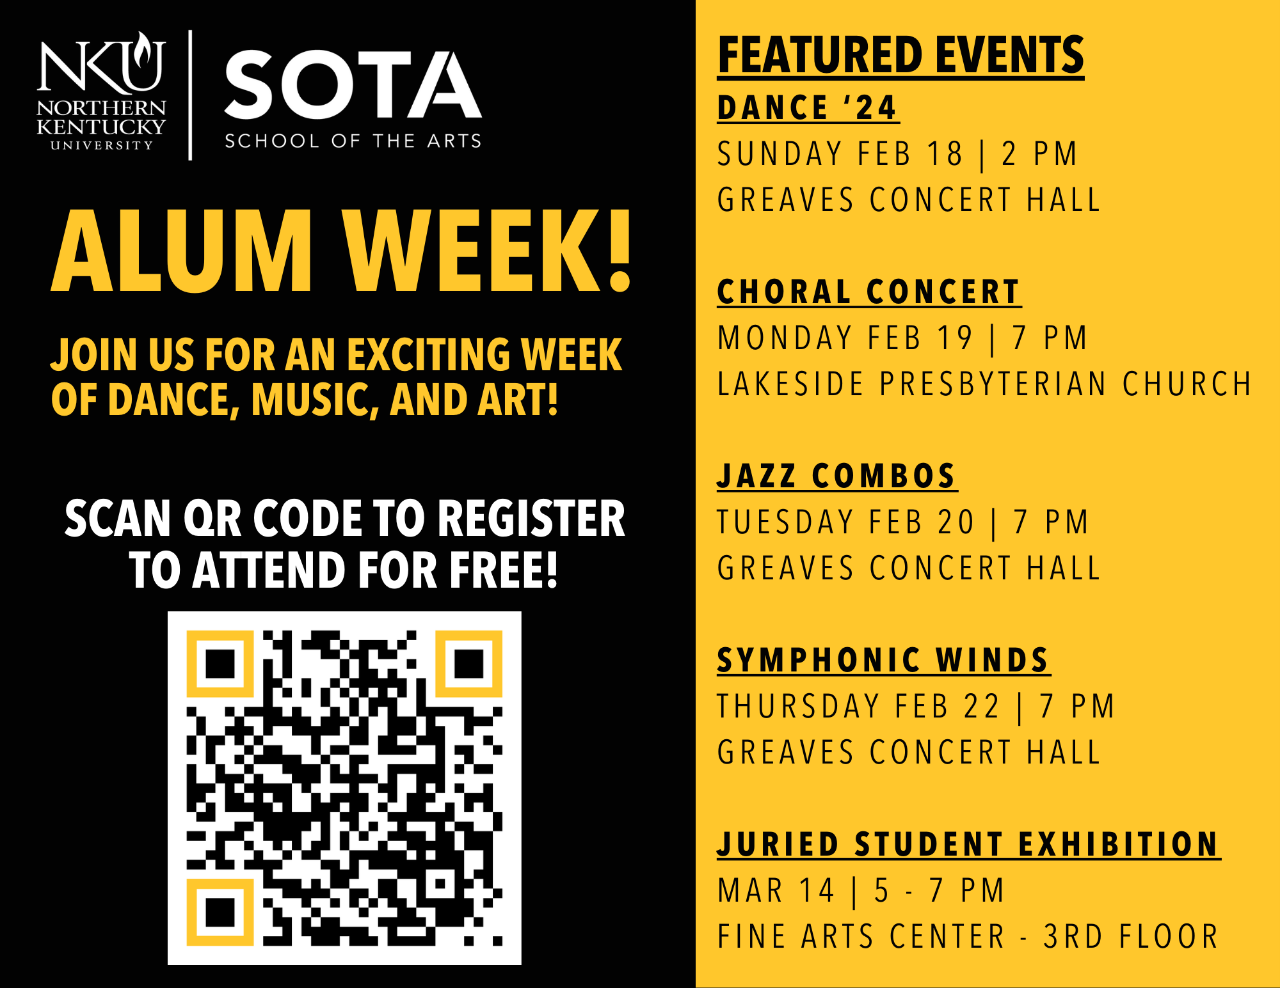 Yellow and Black Alum Week Flyer with QR code for registration and list of events on right side